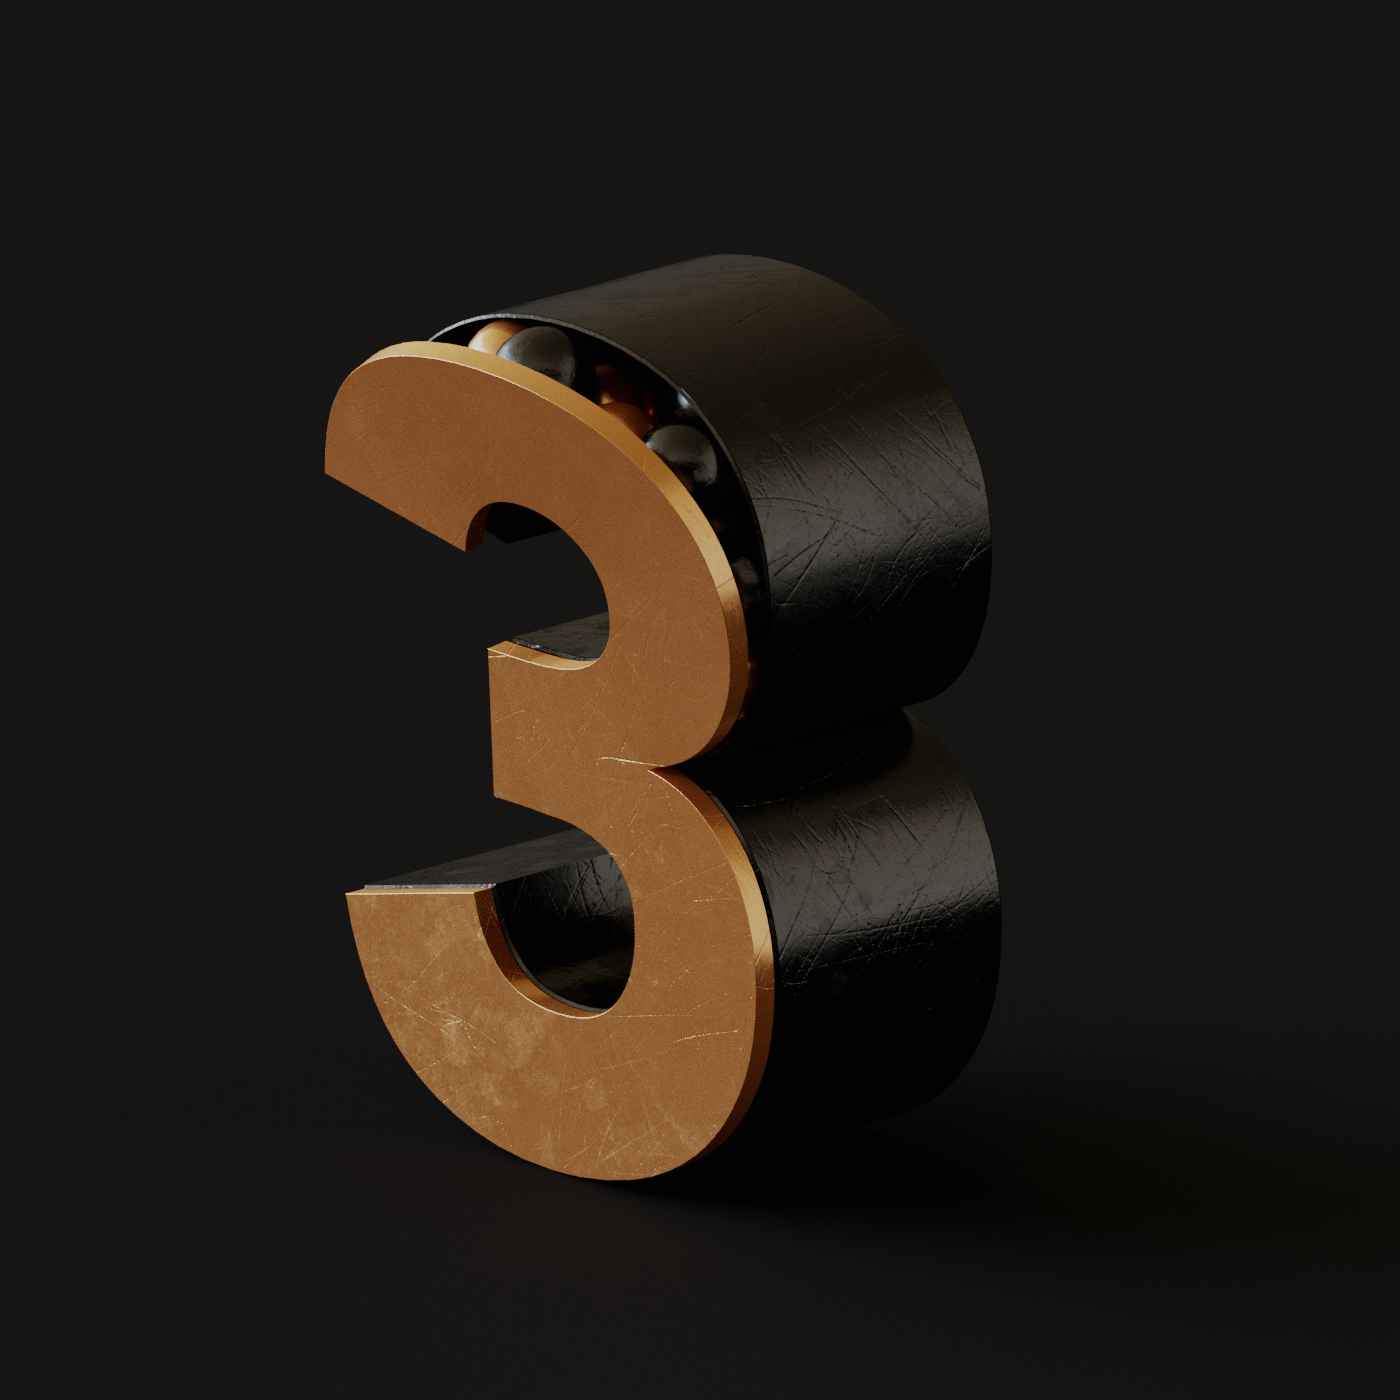 36daysoftype typography   letters lettering 3D 3d letters cinema 4d 3D Type Render corona render 